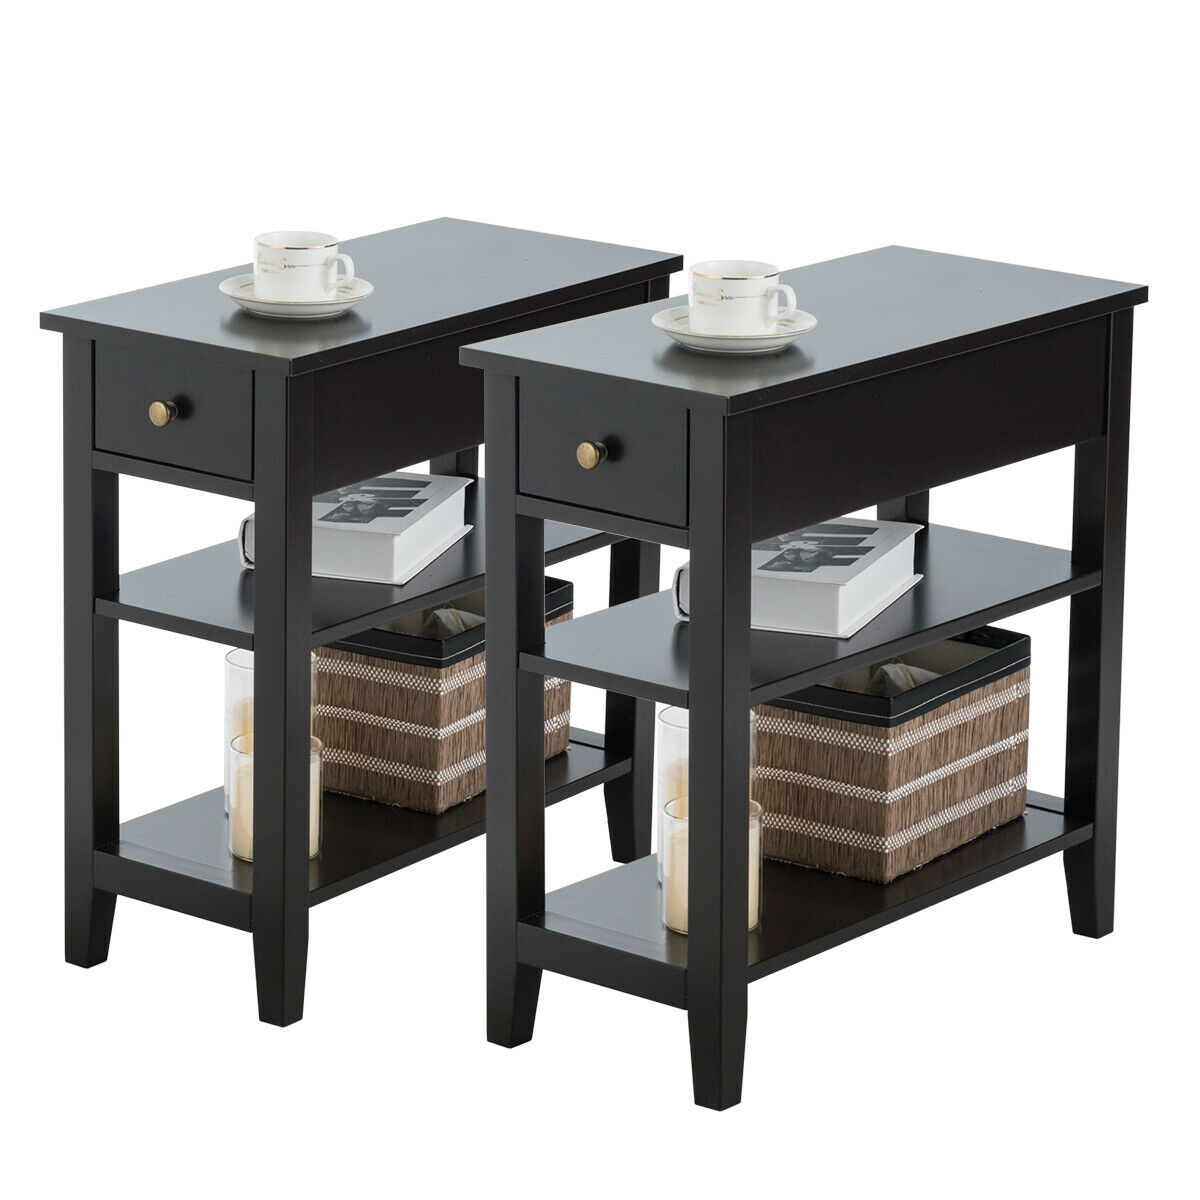 Set Of 2 3-Tier Nightstand Bedside Side End Table W/Double Shelves Drawer Black